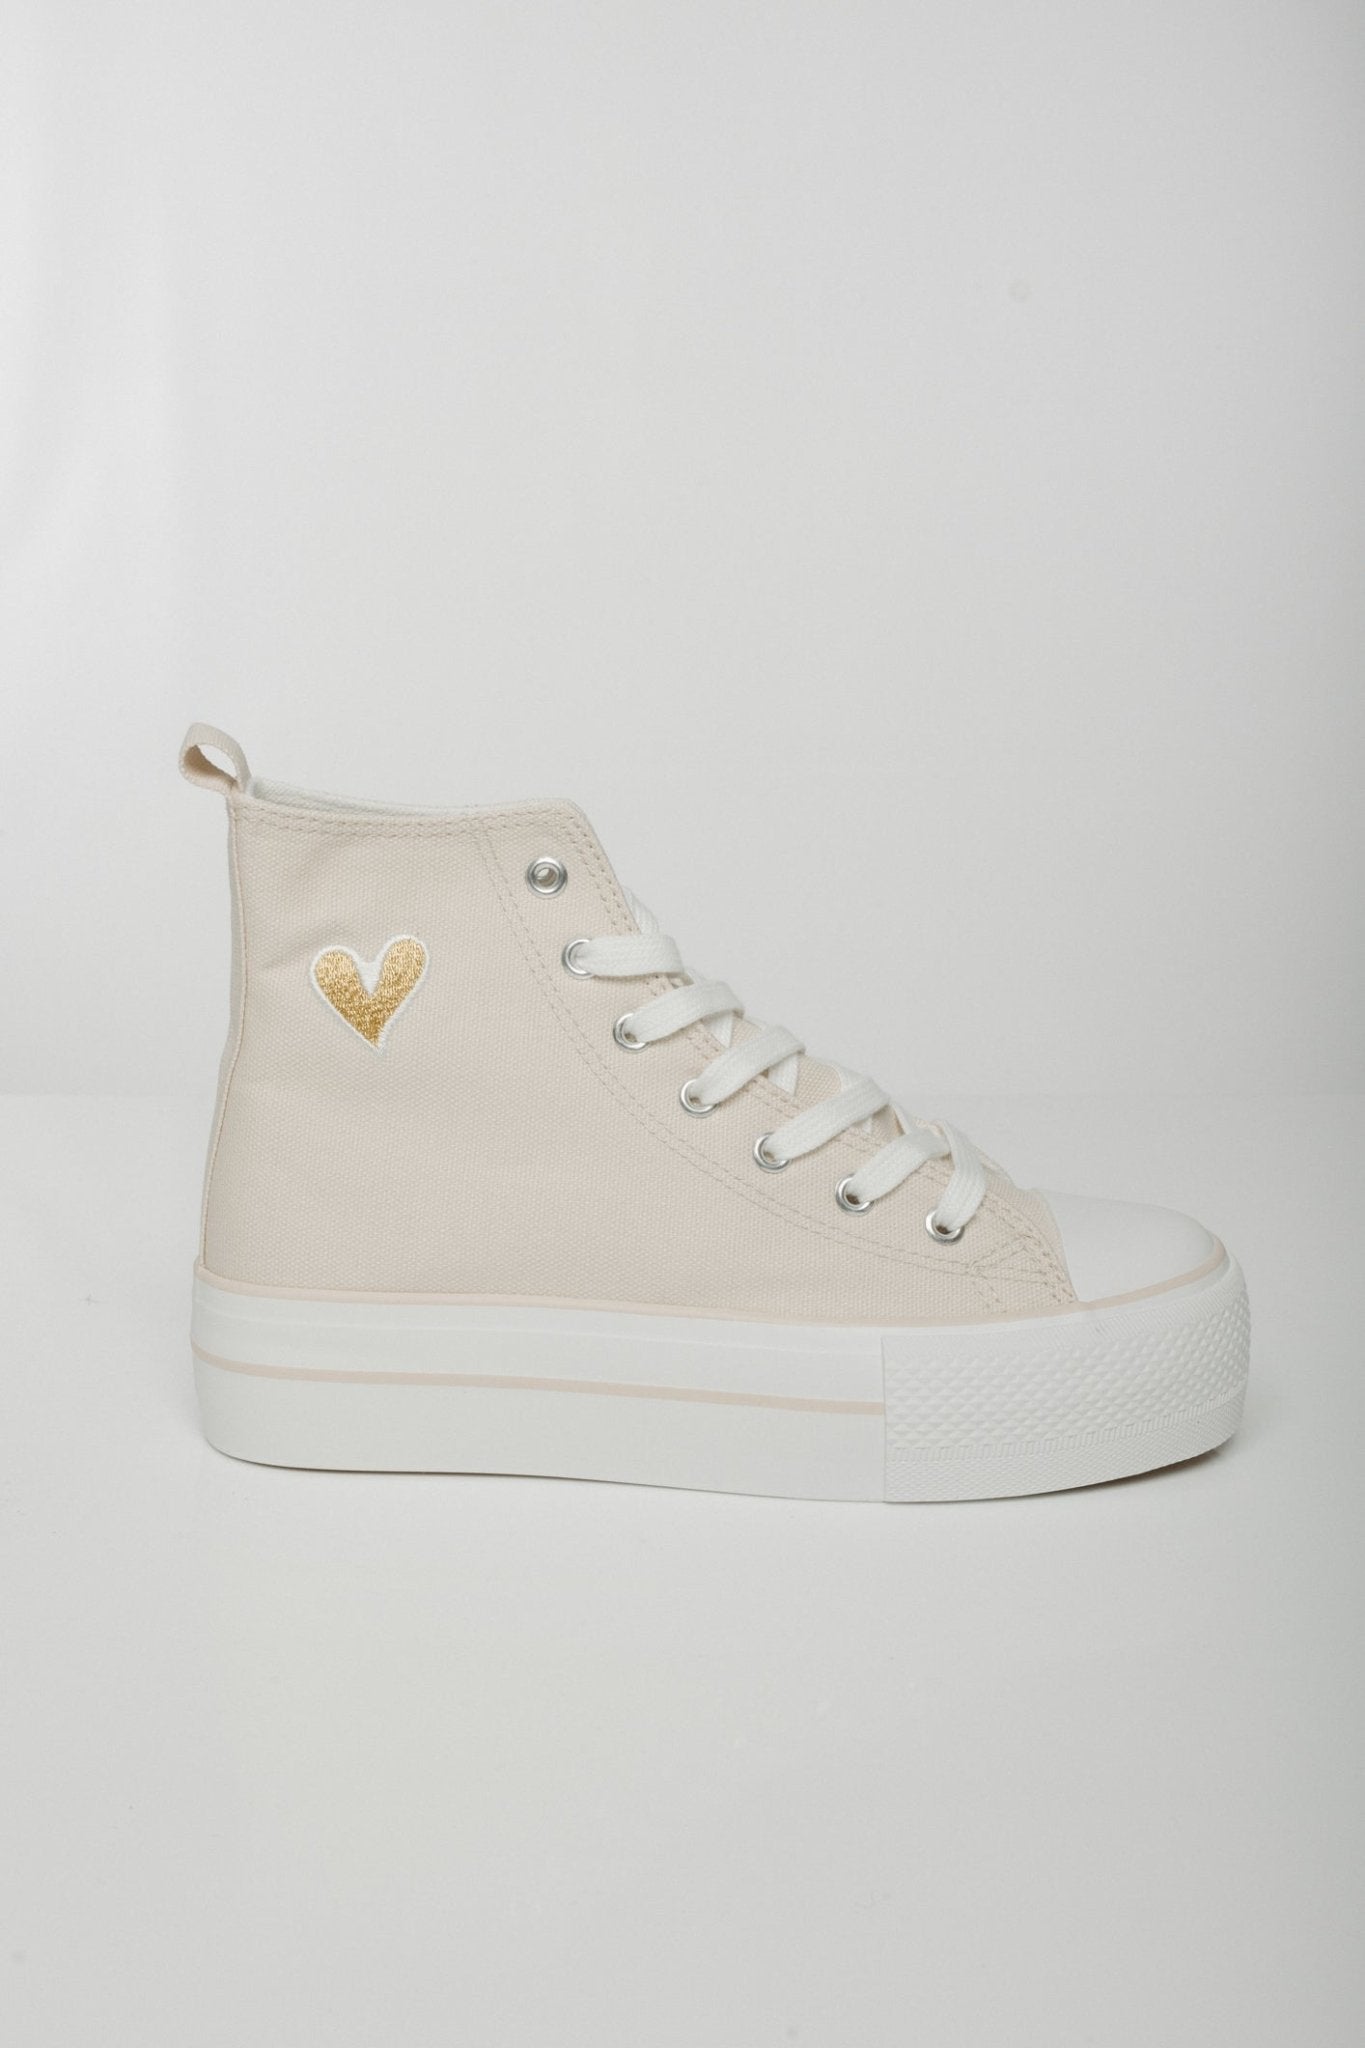 Sadie Embroidered High Top In Neutral - The Walk in Wardrobe